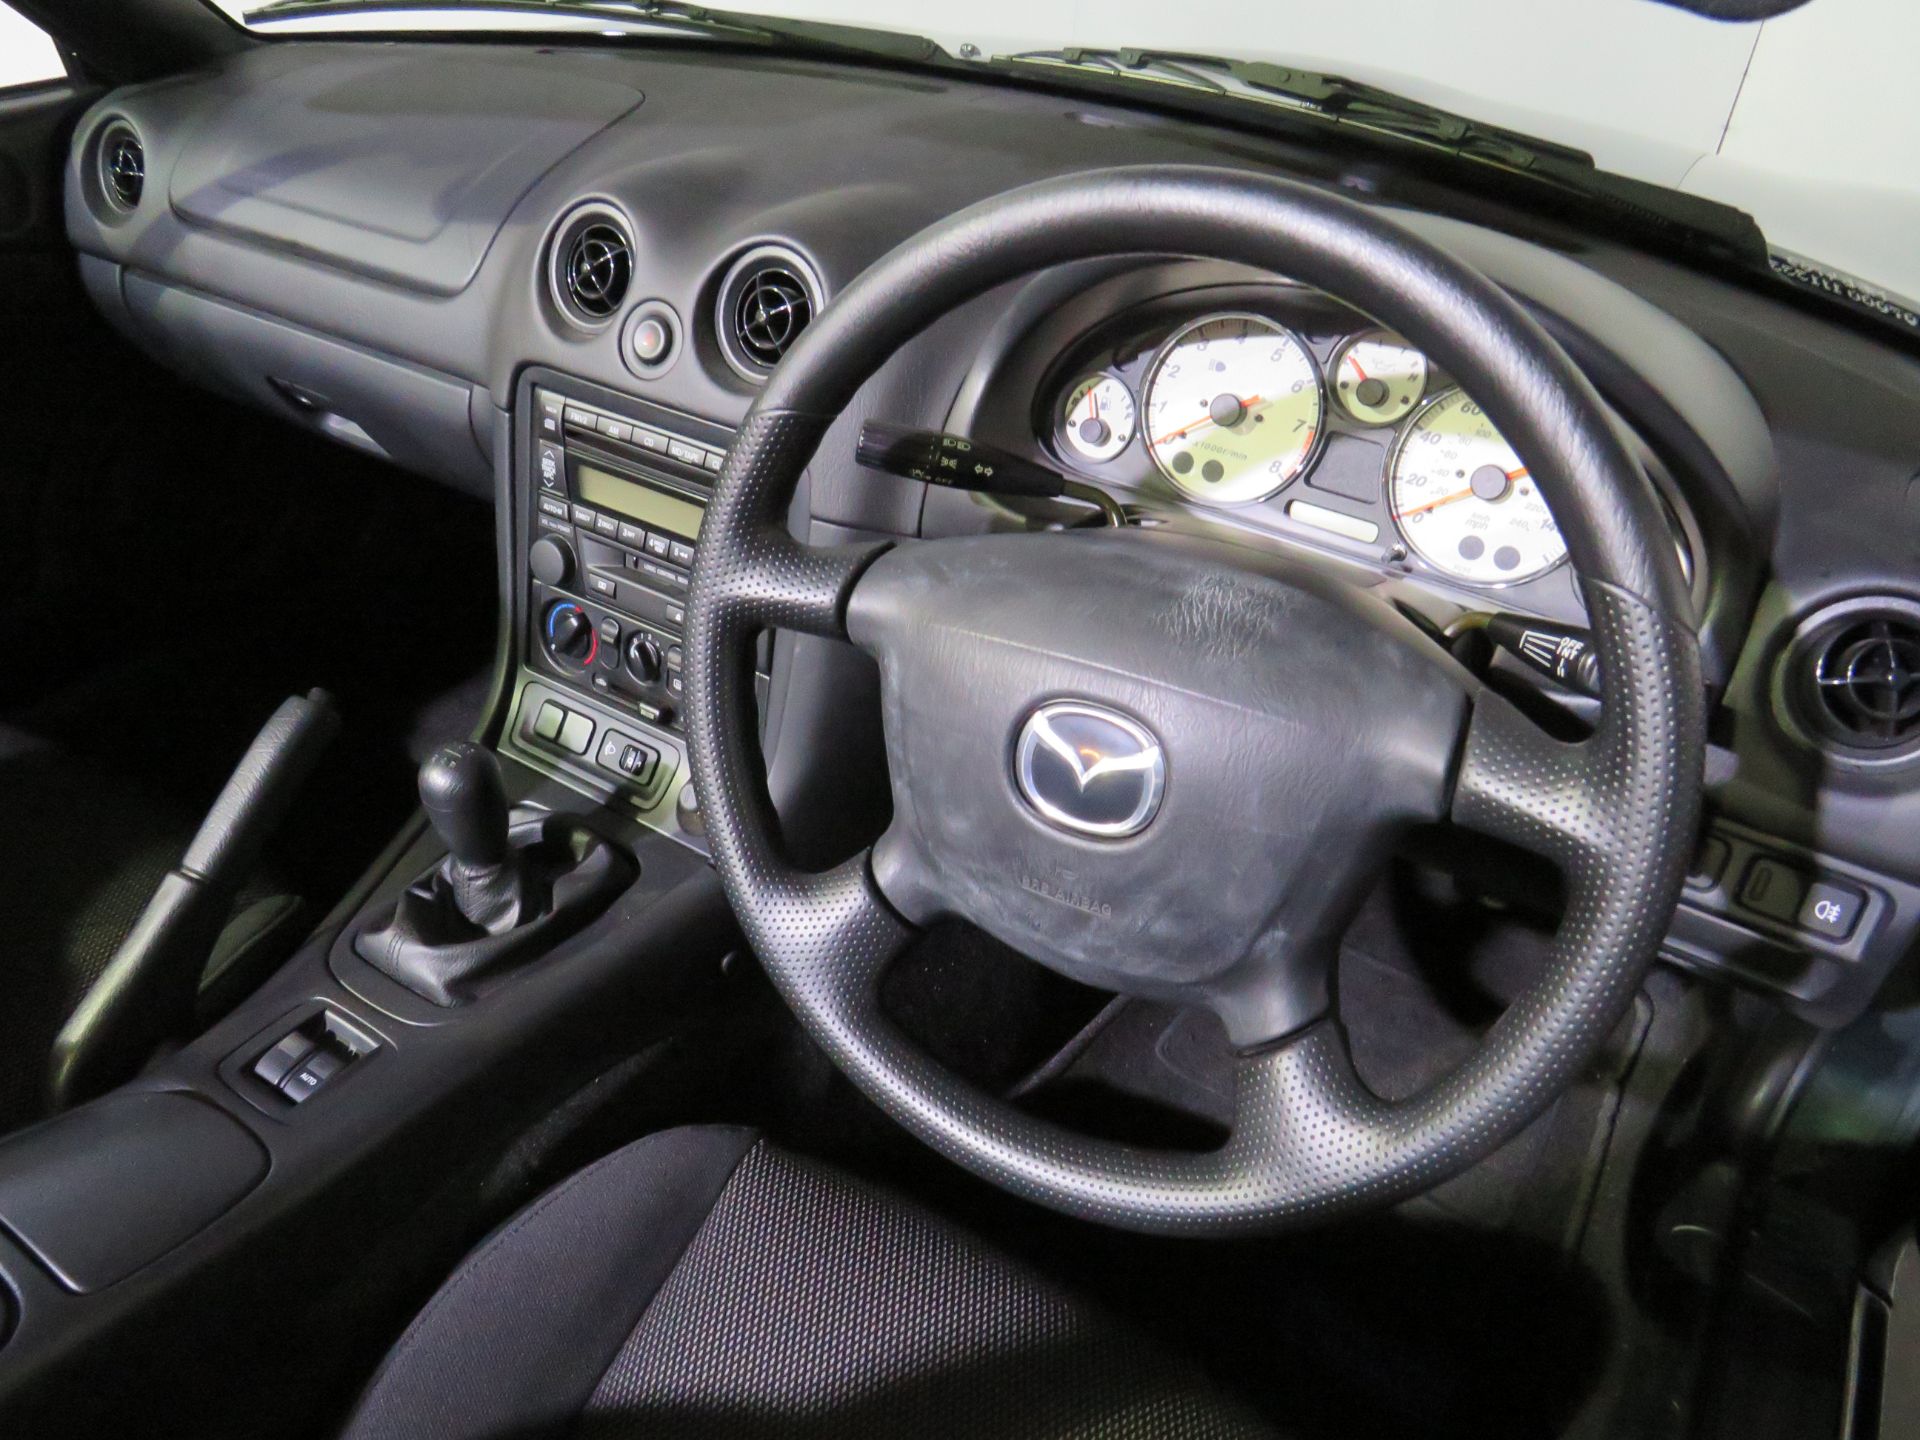 2002 Mazda MX-5 - 1598cc - 1,900 MILES FROM NEW - Image 15 of 39